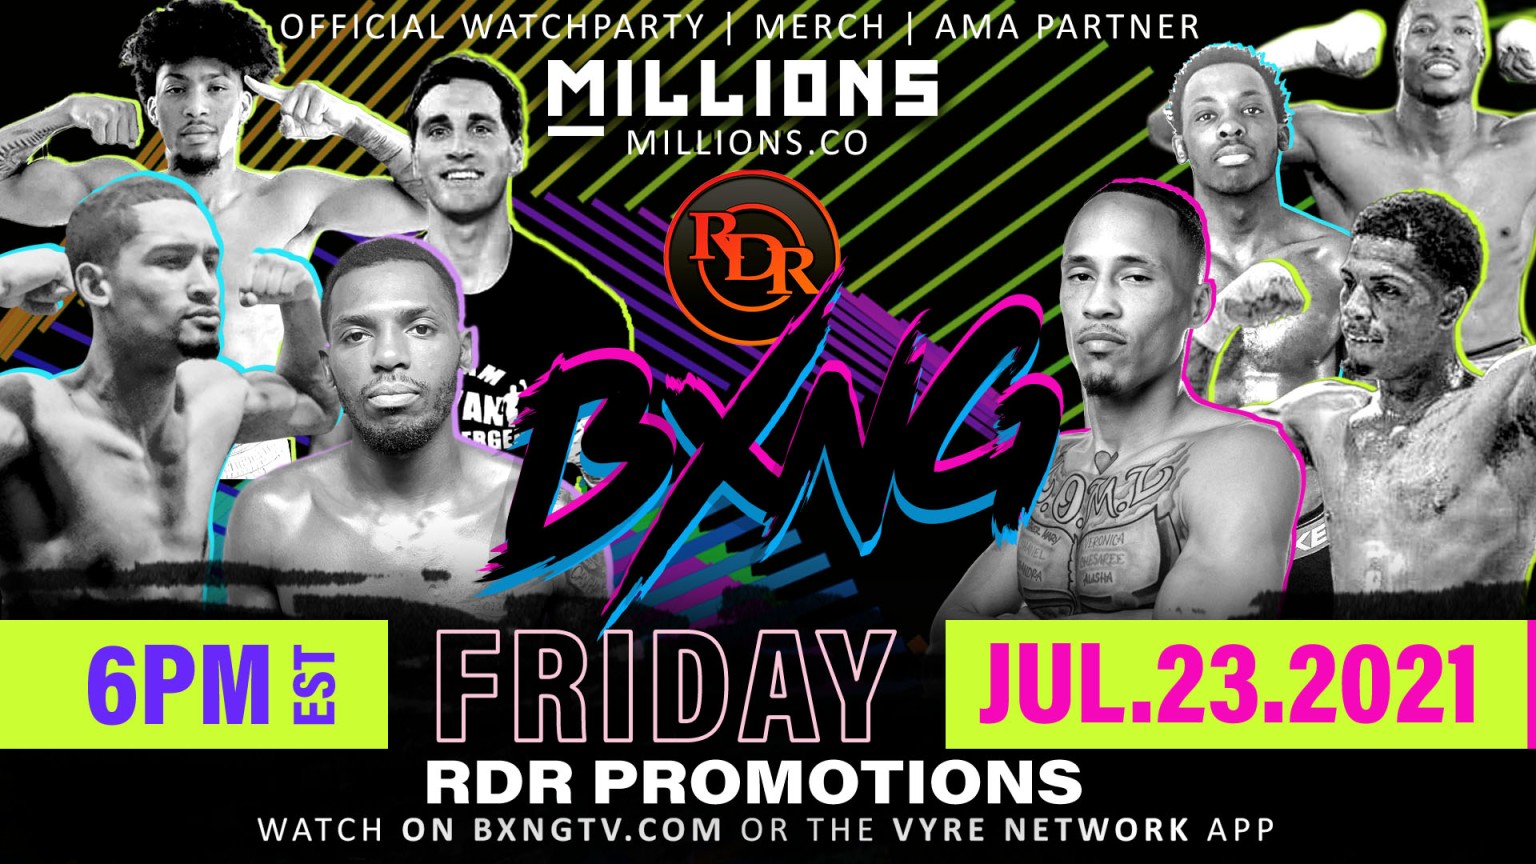 BXNG Presents RDR Promotions 6 PM Show, 7/23 from Philadelphia, PA